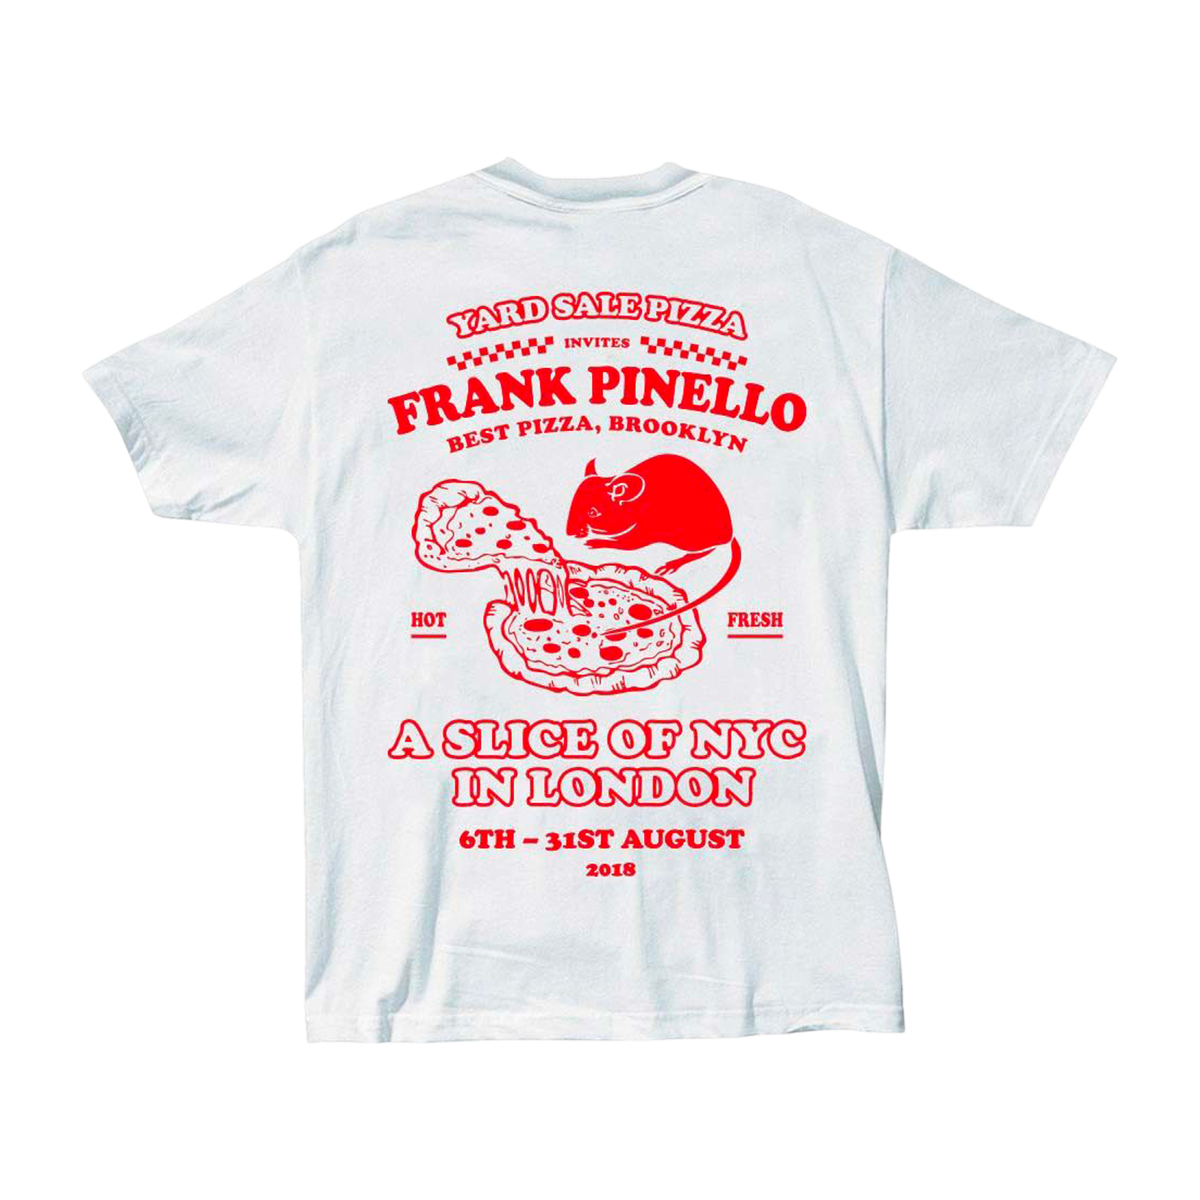 The Frank Pinello T-shirt